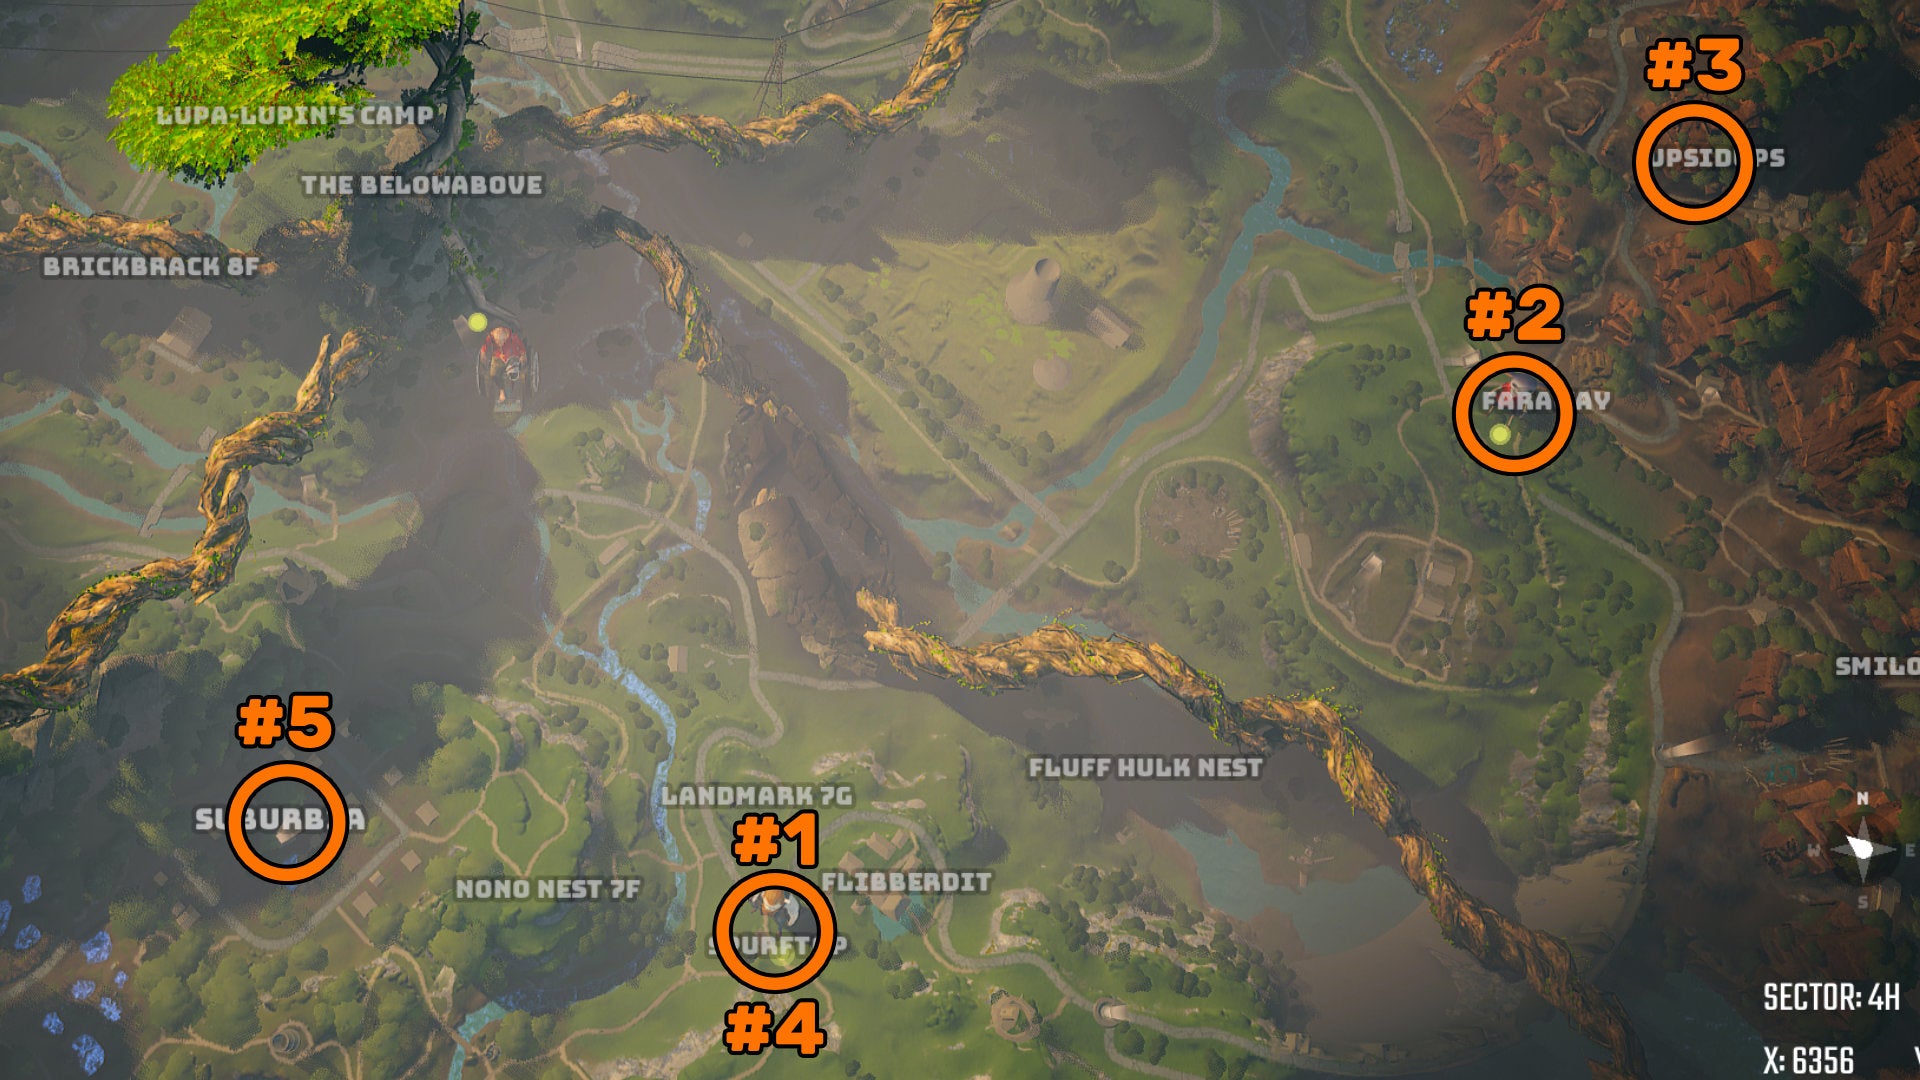 A screenshot of part of the Biomutant map, annotated with the steps to unlock the ability to change your appearance.